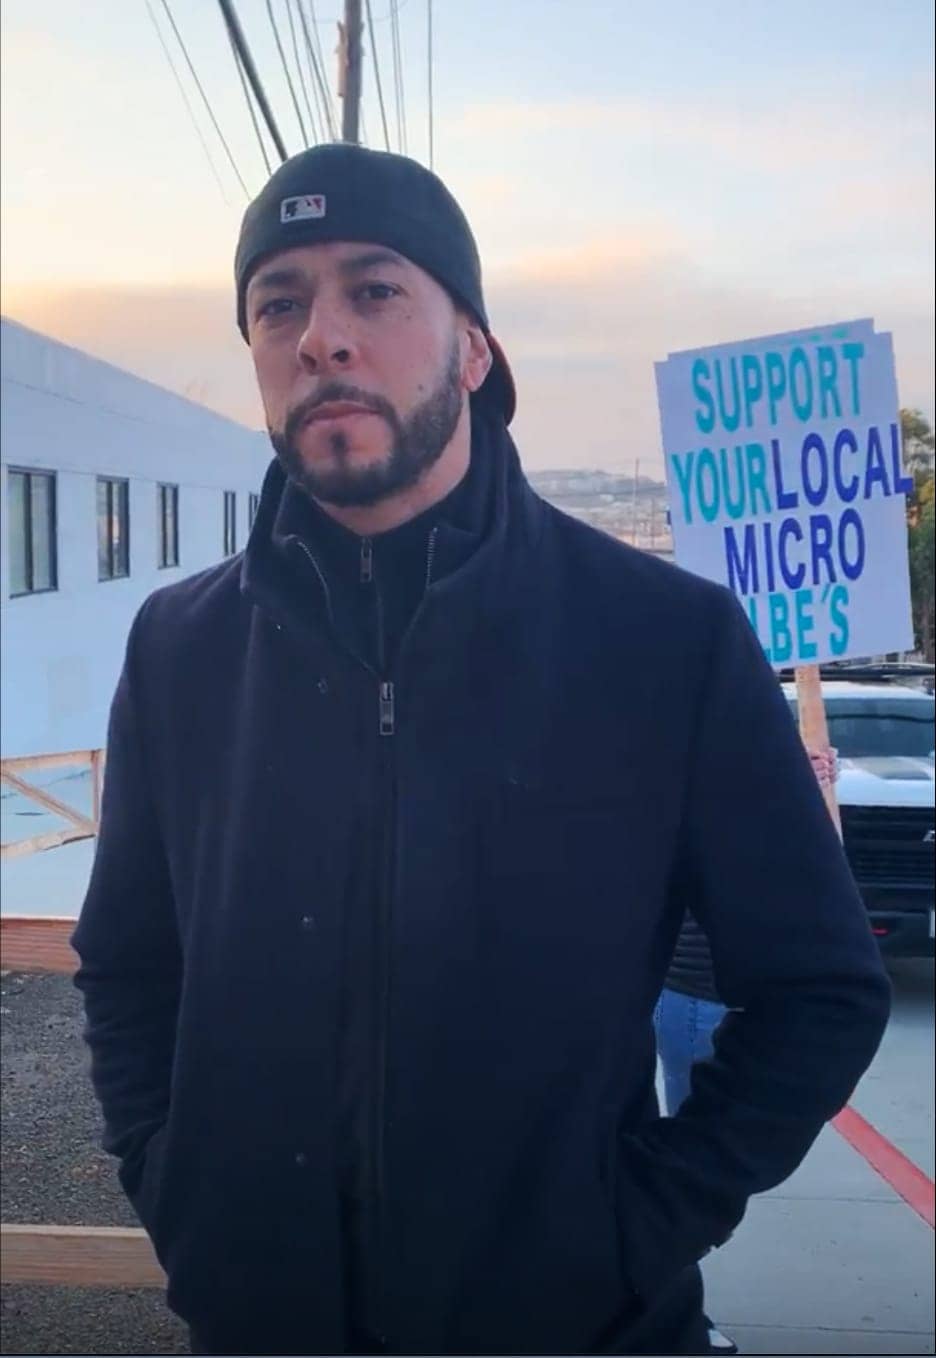 Triston-Dion-of-Streamline-Drywall-Black-contractors-protest-121422, <strong>Black contractors: ‘We want to put our community to work’</strong>, Local News & Views 